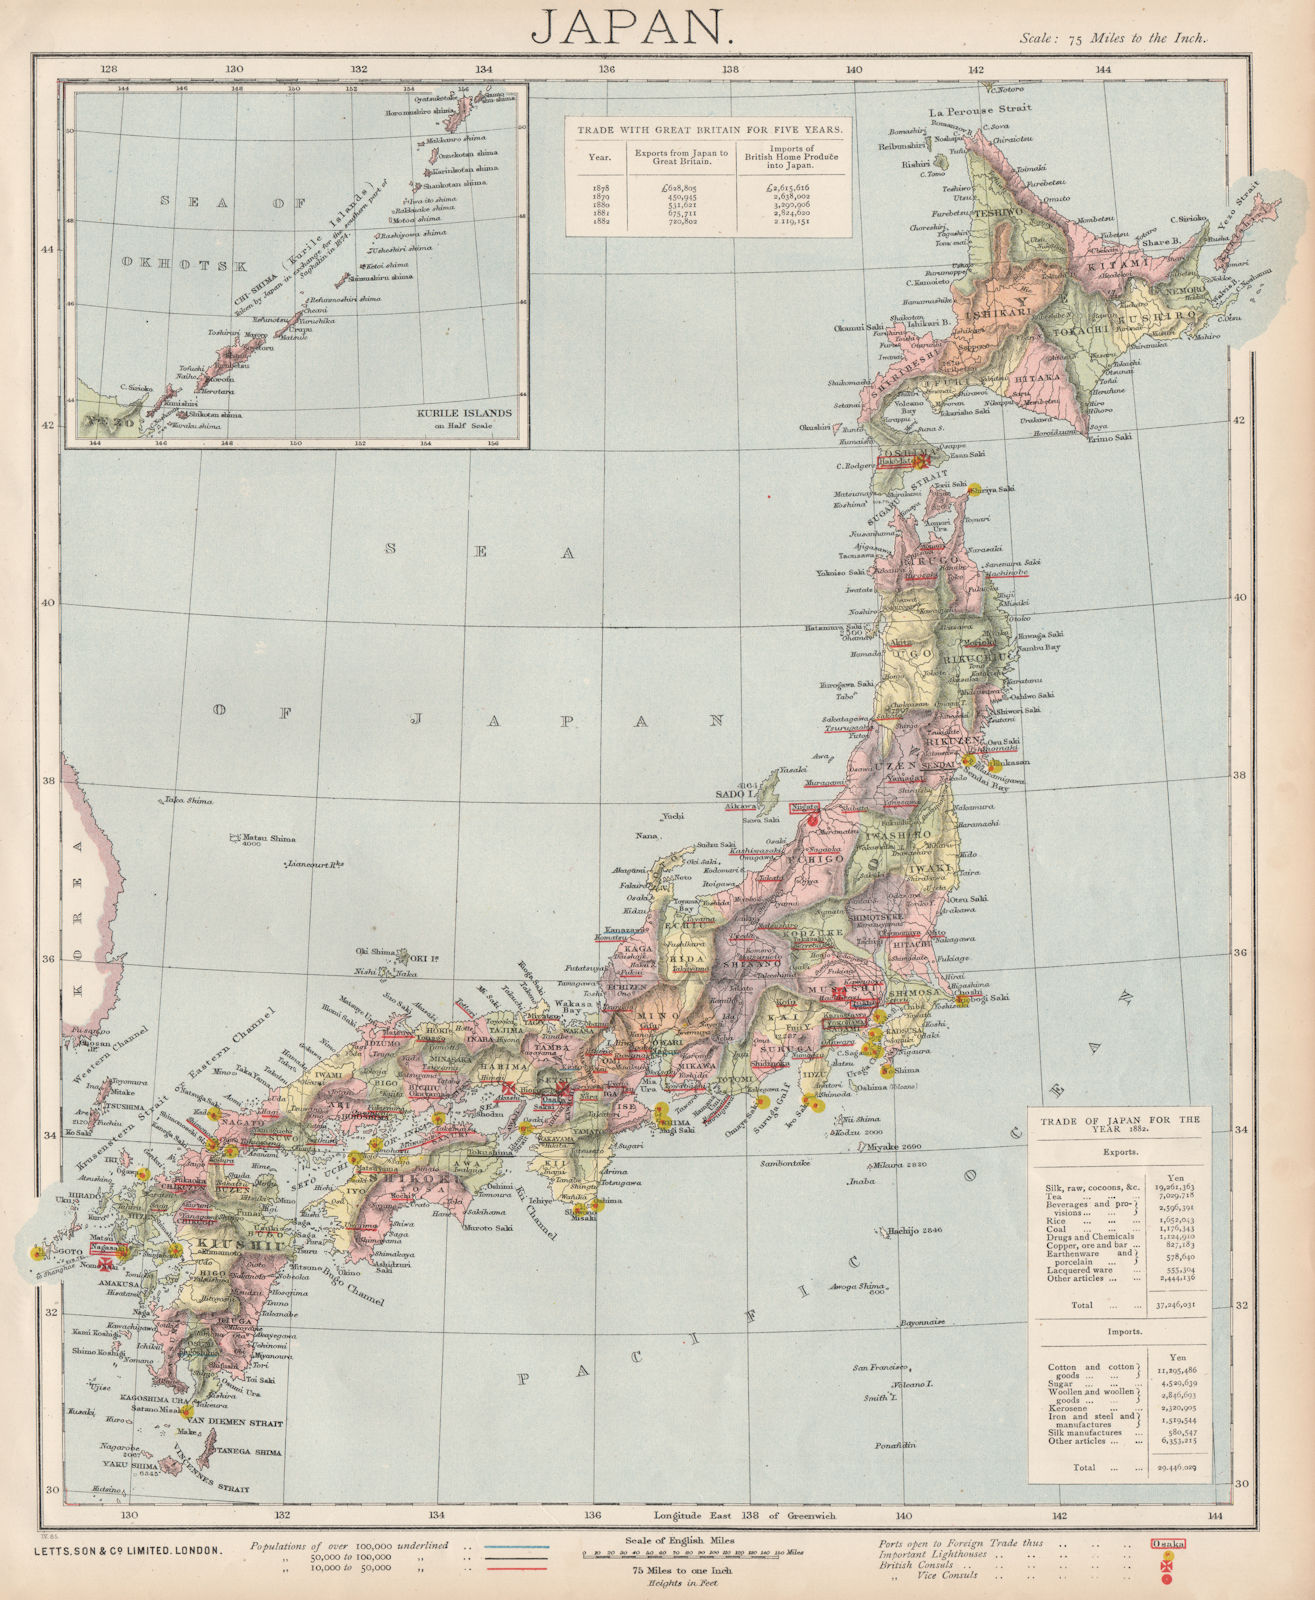 JAPAN. Ports open to foreign trade, lighthouses, British Consuls. LETTS 1889 map